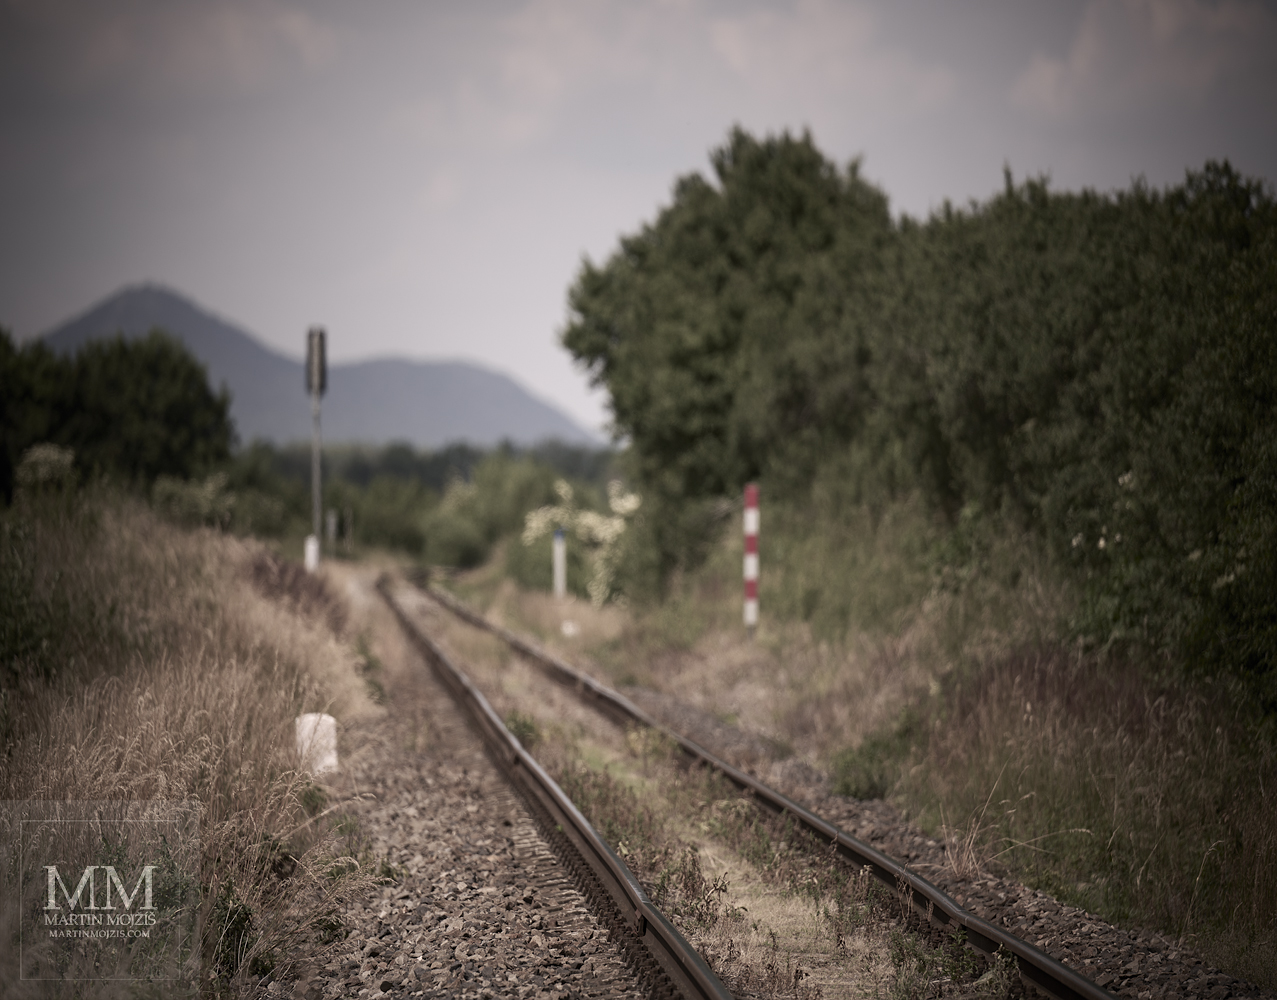 A railway track in a landscape. Fine art photograph THE WAY TO THE NORTH, photographed by Martin Mojzis.